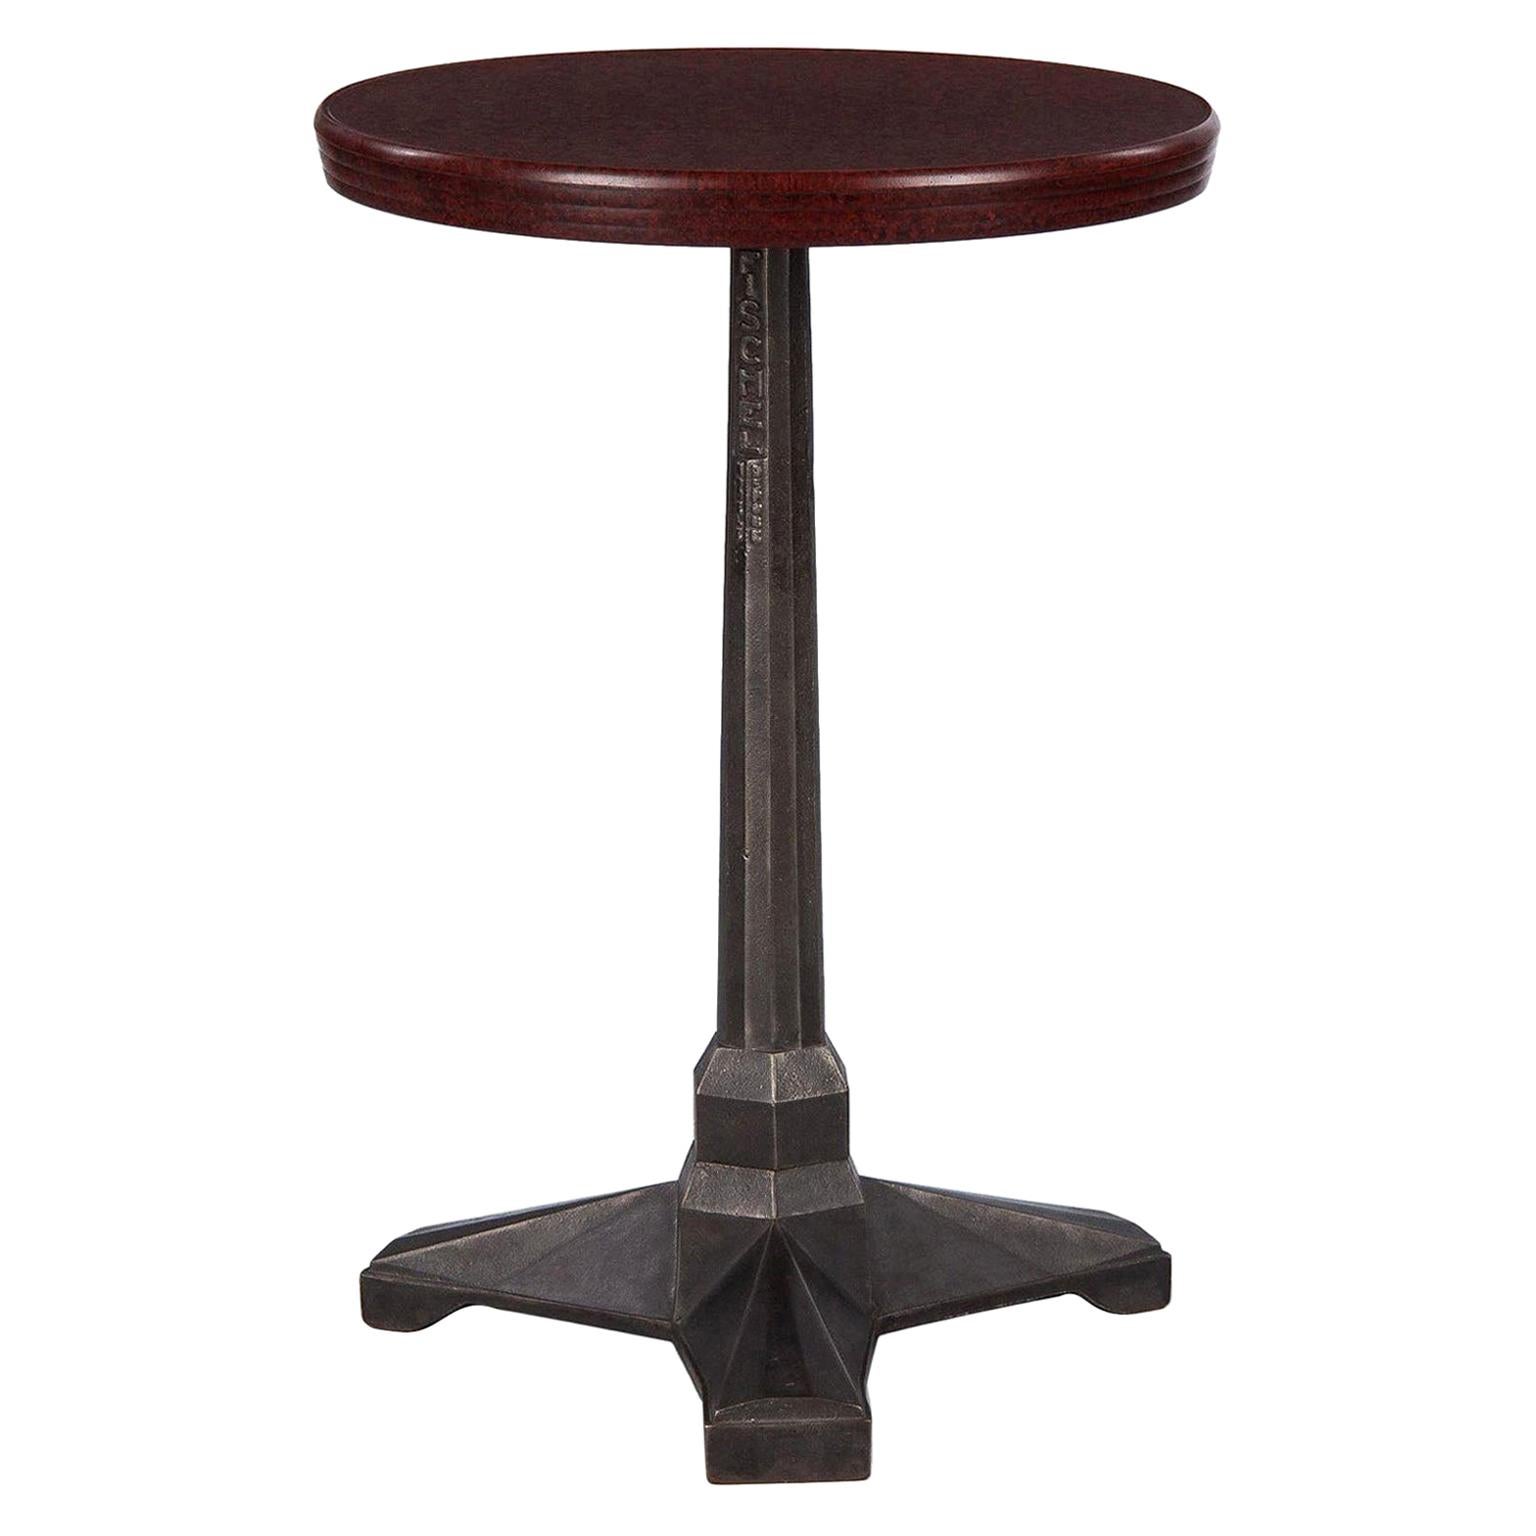 French Art Deco Bakelite and Iron Bistro Table by Fischel, 1930s